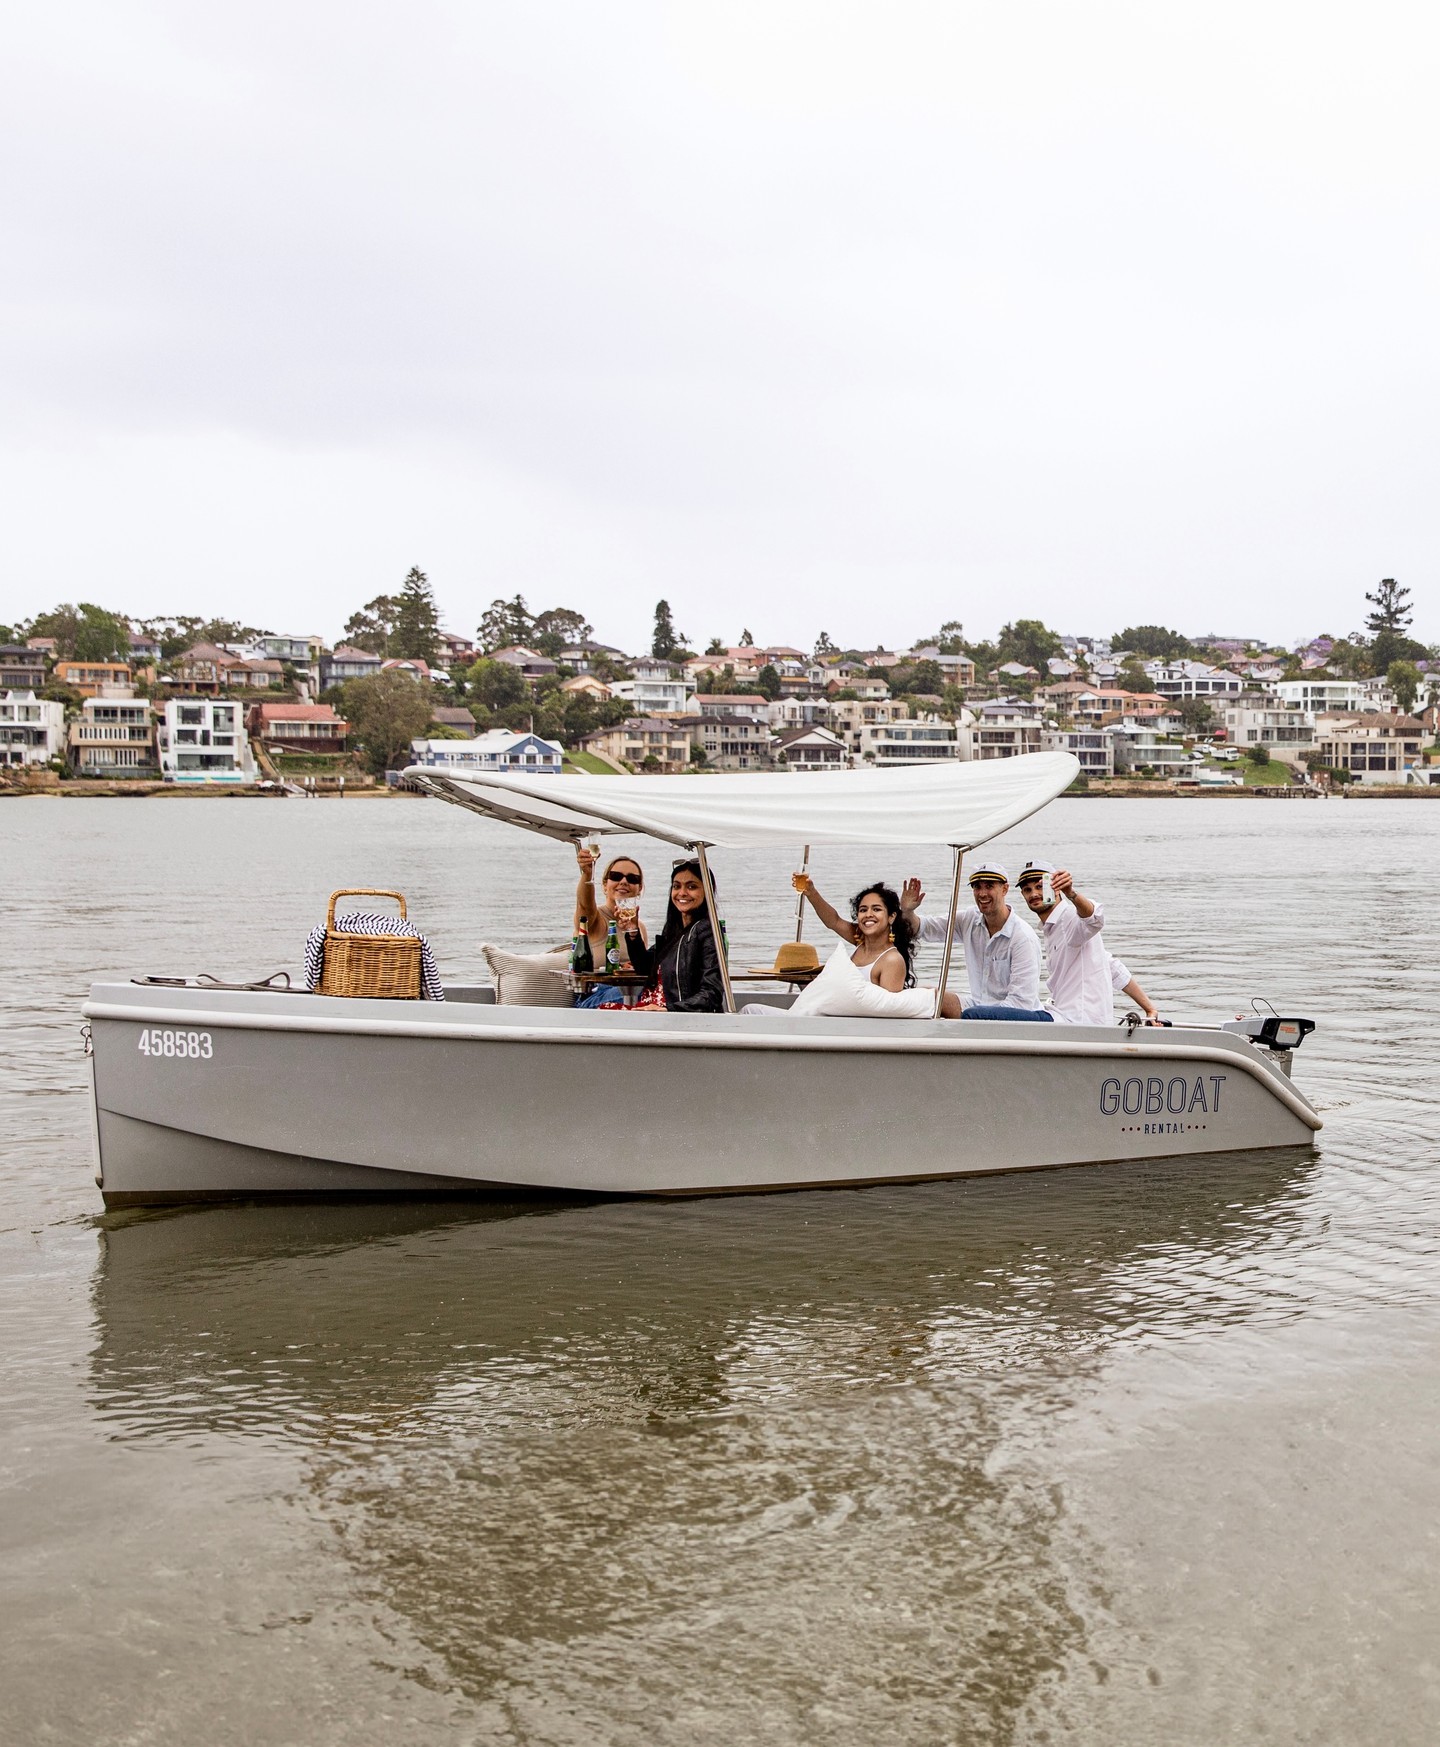 GoBoat Melbourne - Experience your very own floating picnic spot